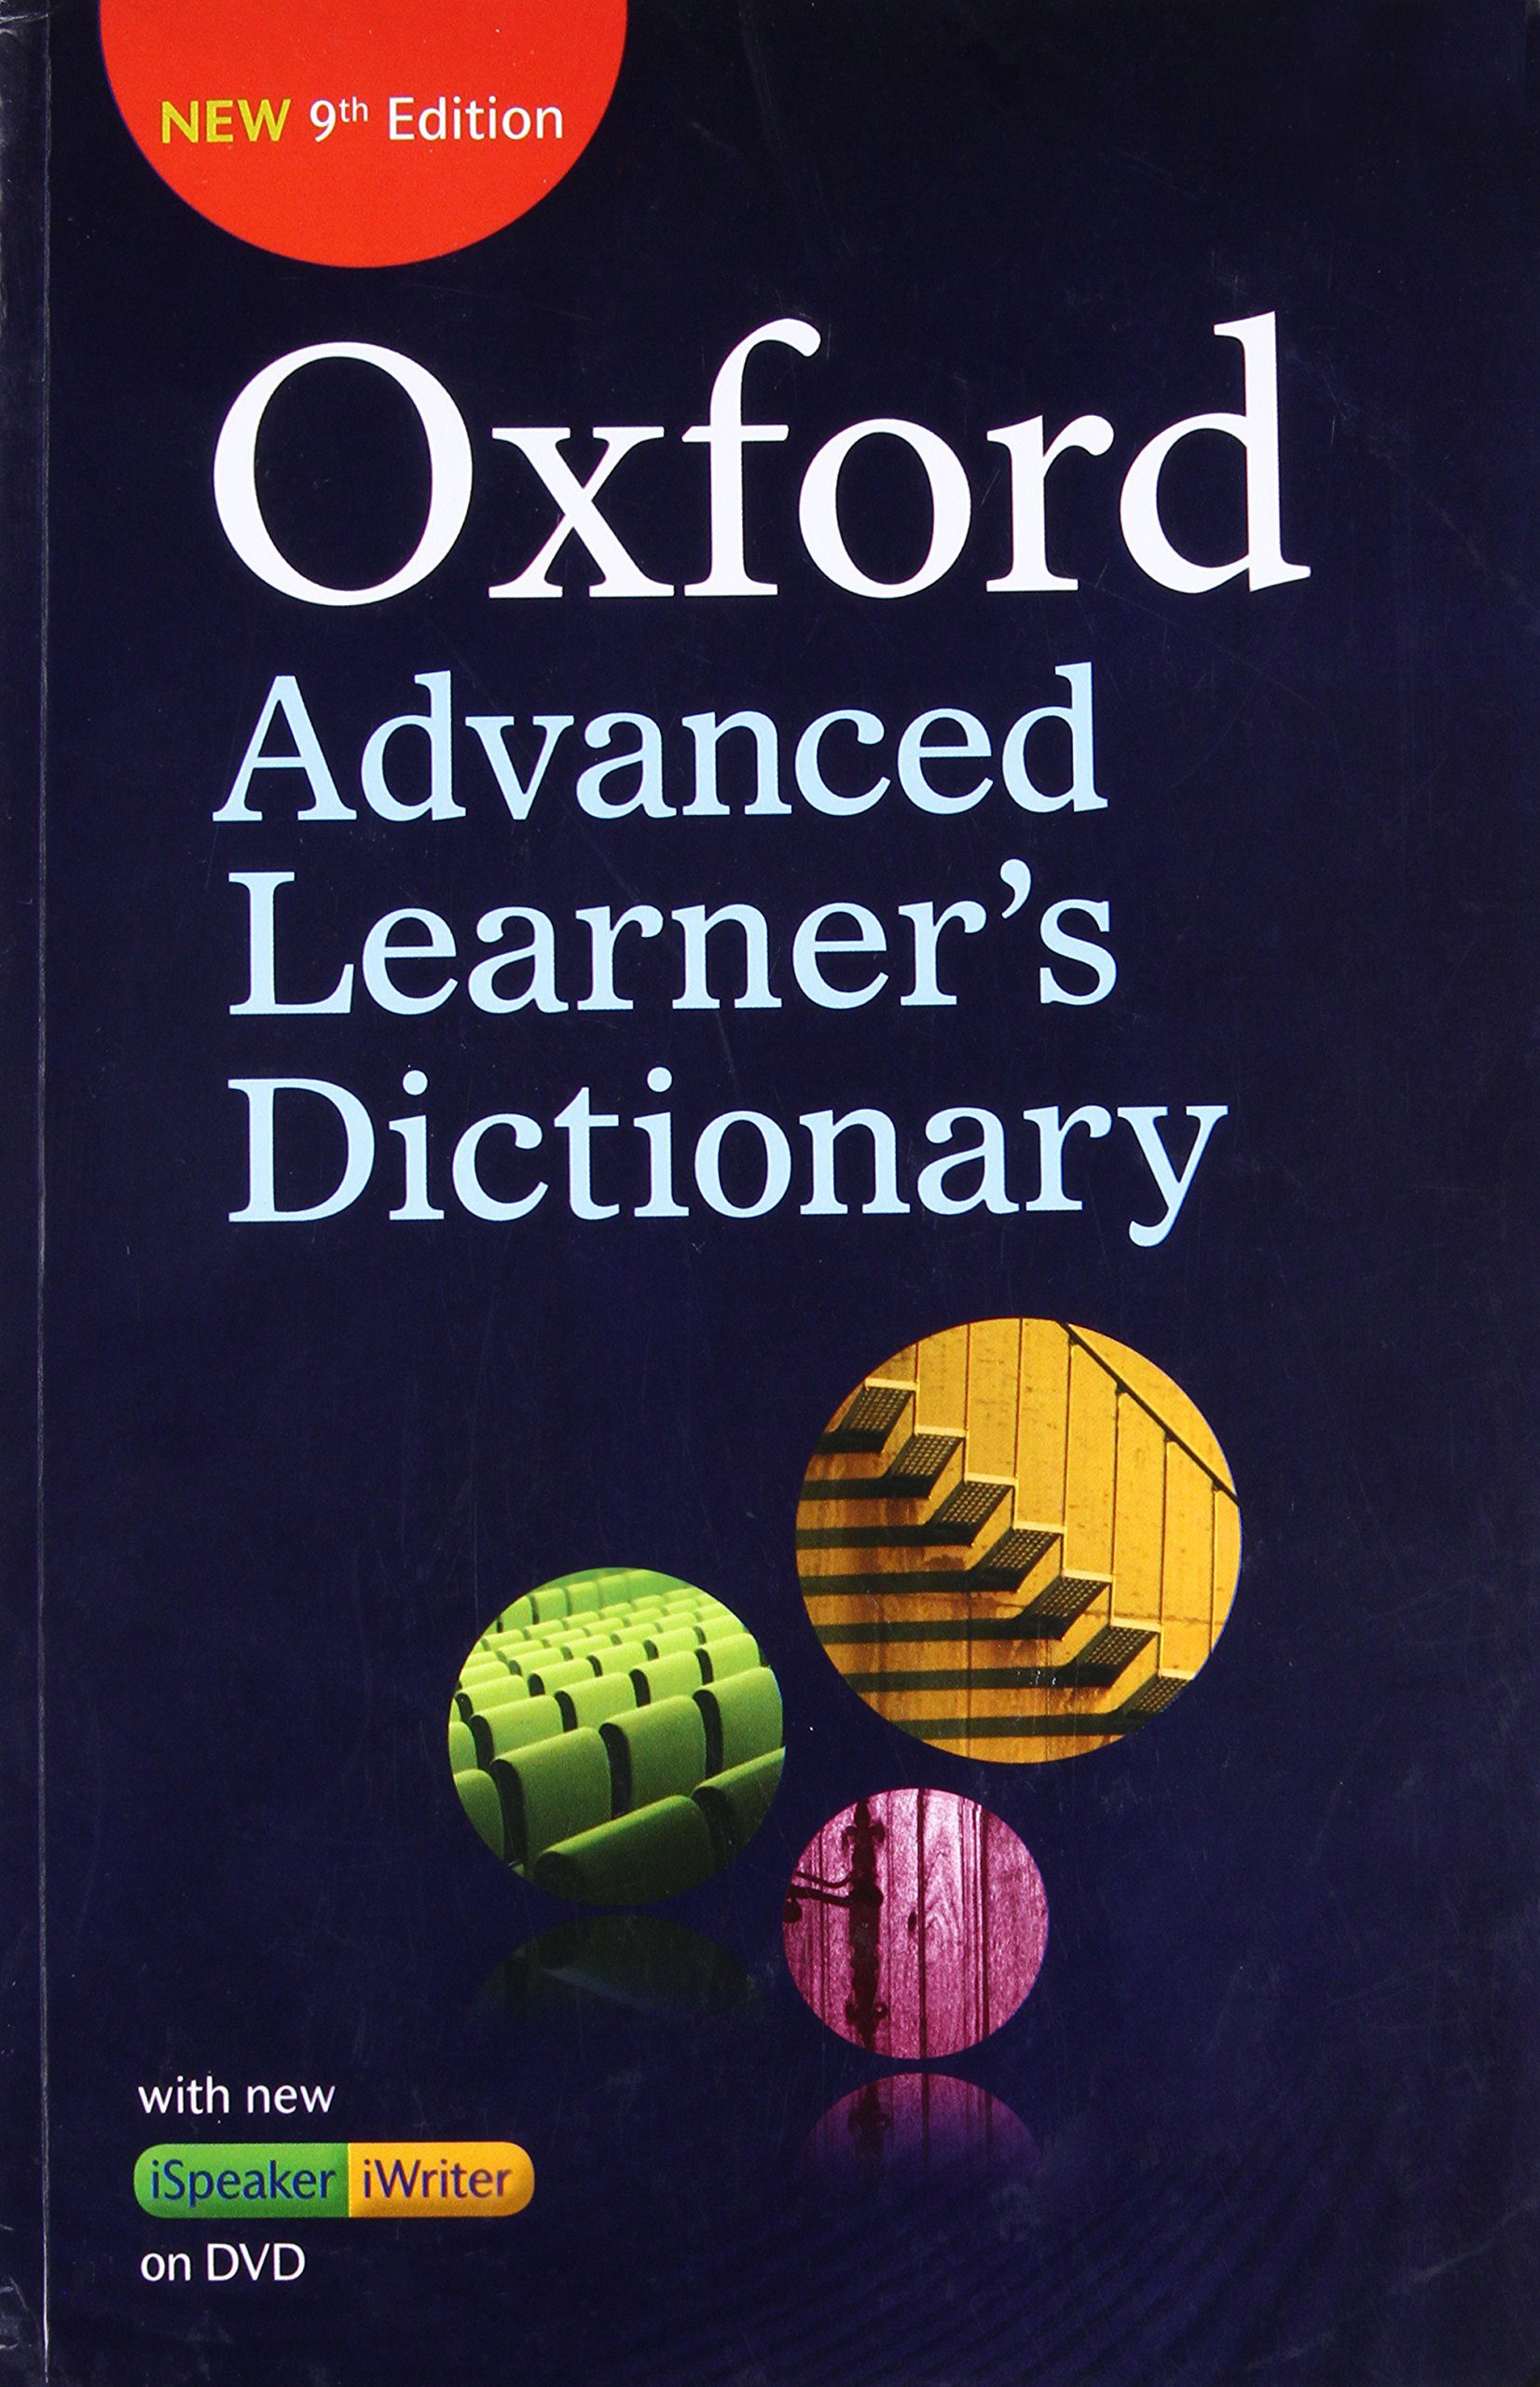 Oxford Advanced Learner’s Dictionary with iWriter With keys